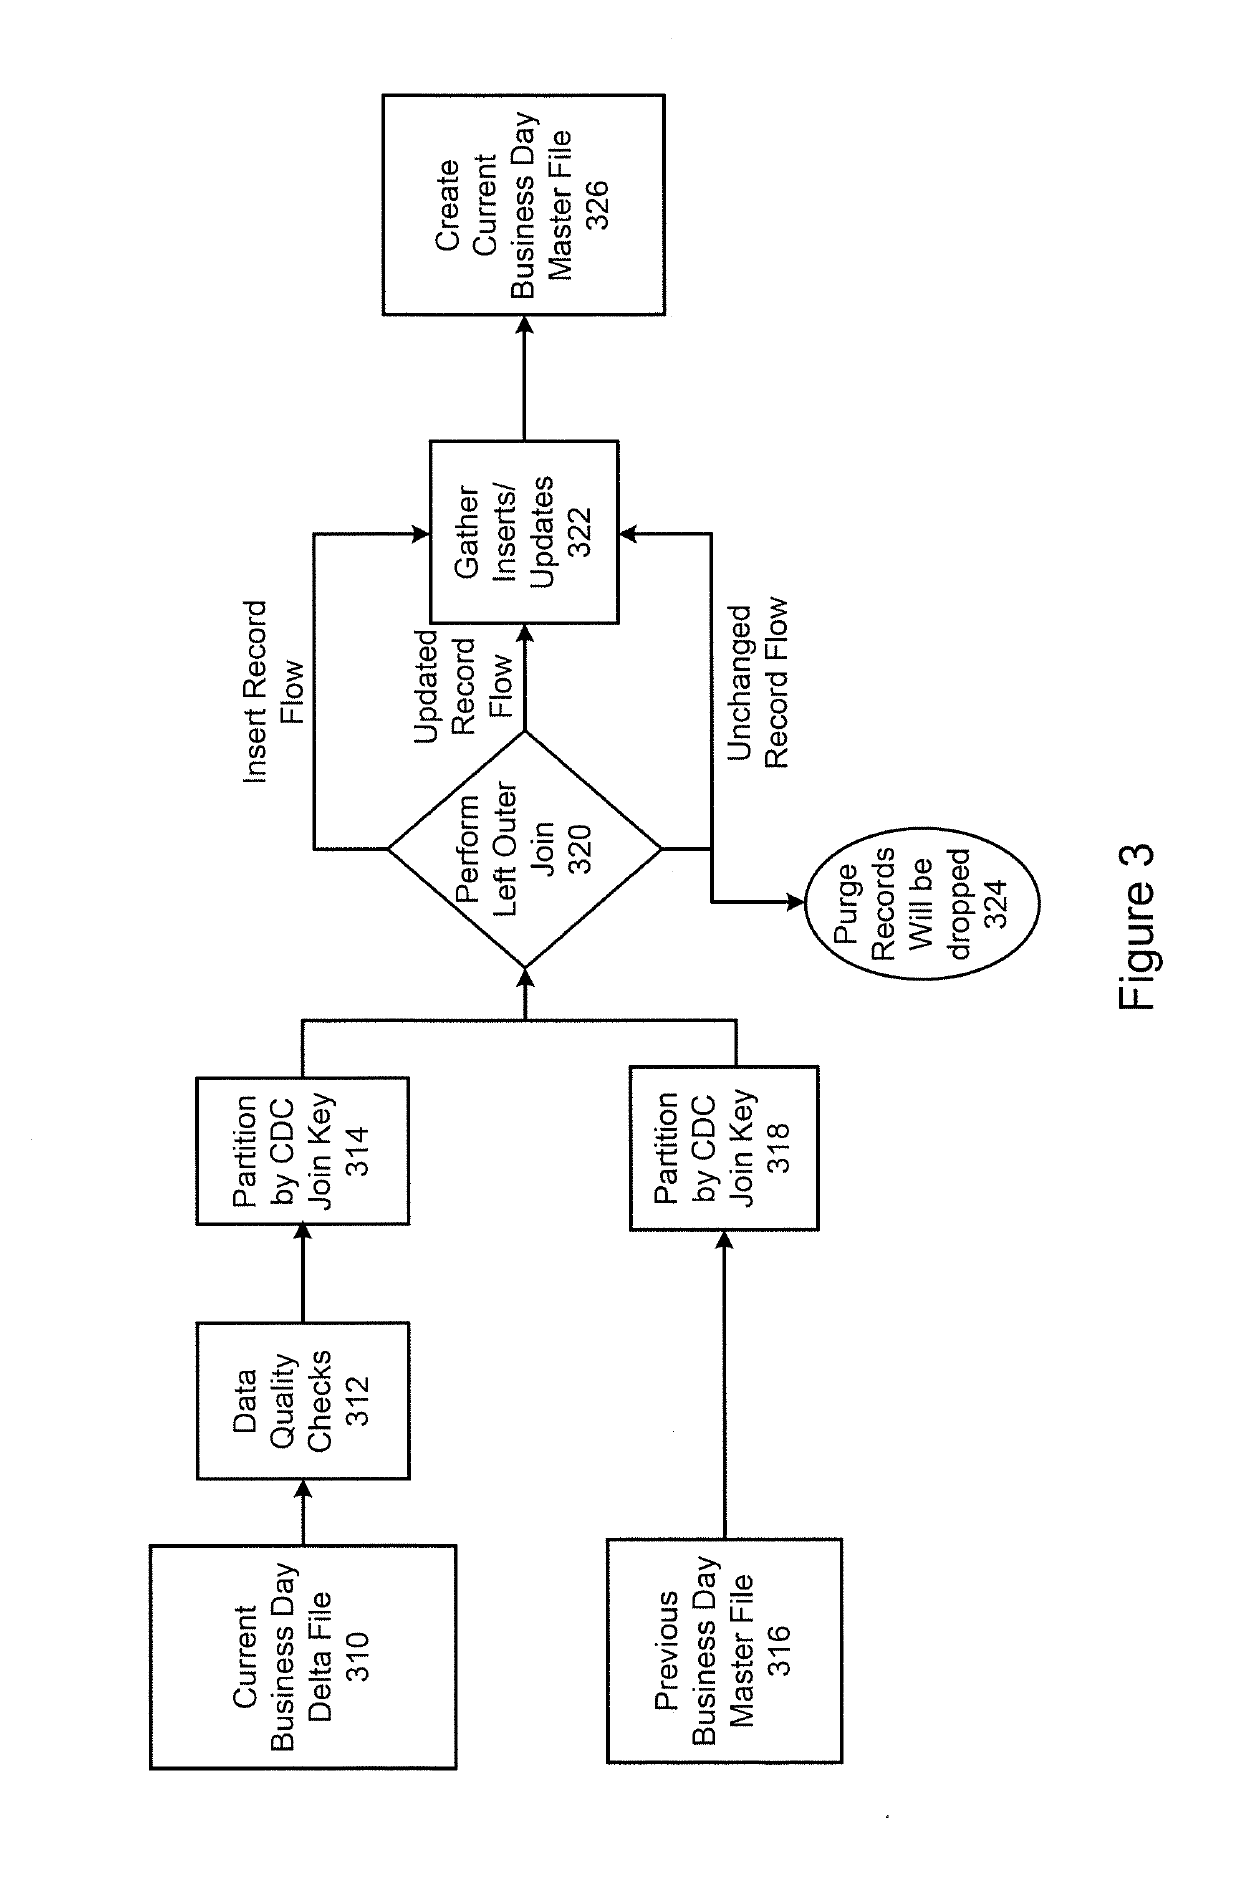 System and method for achieving optimal change data capture (CDC) on hadoop